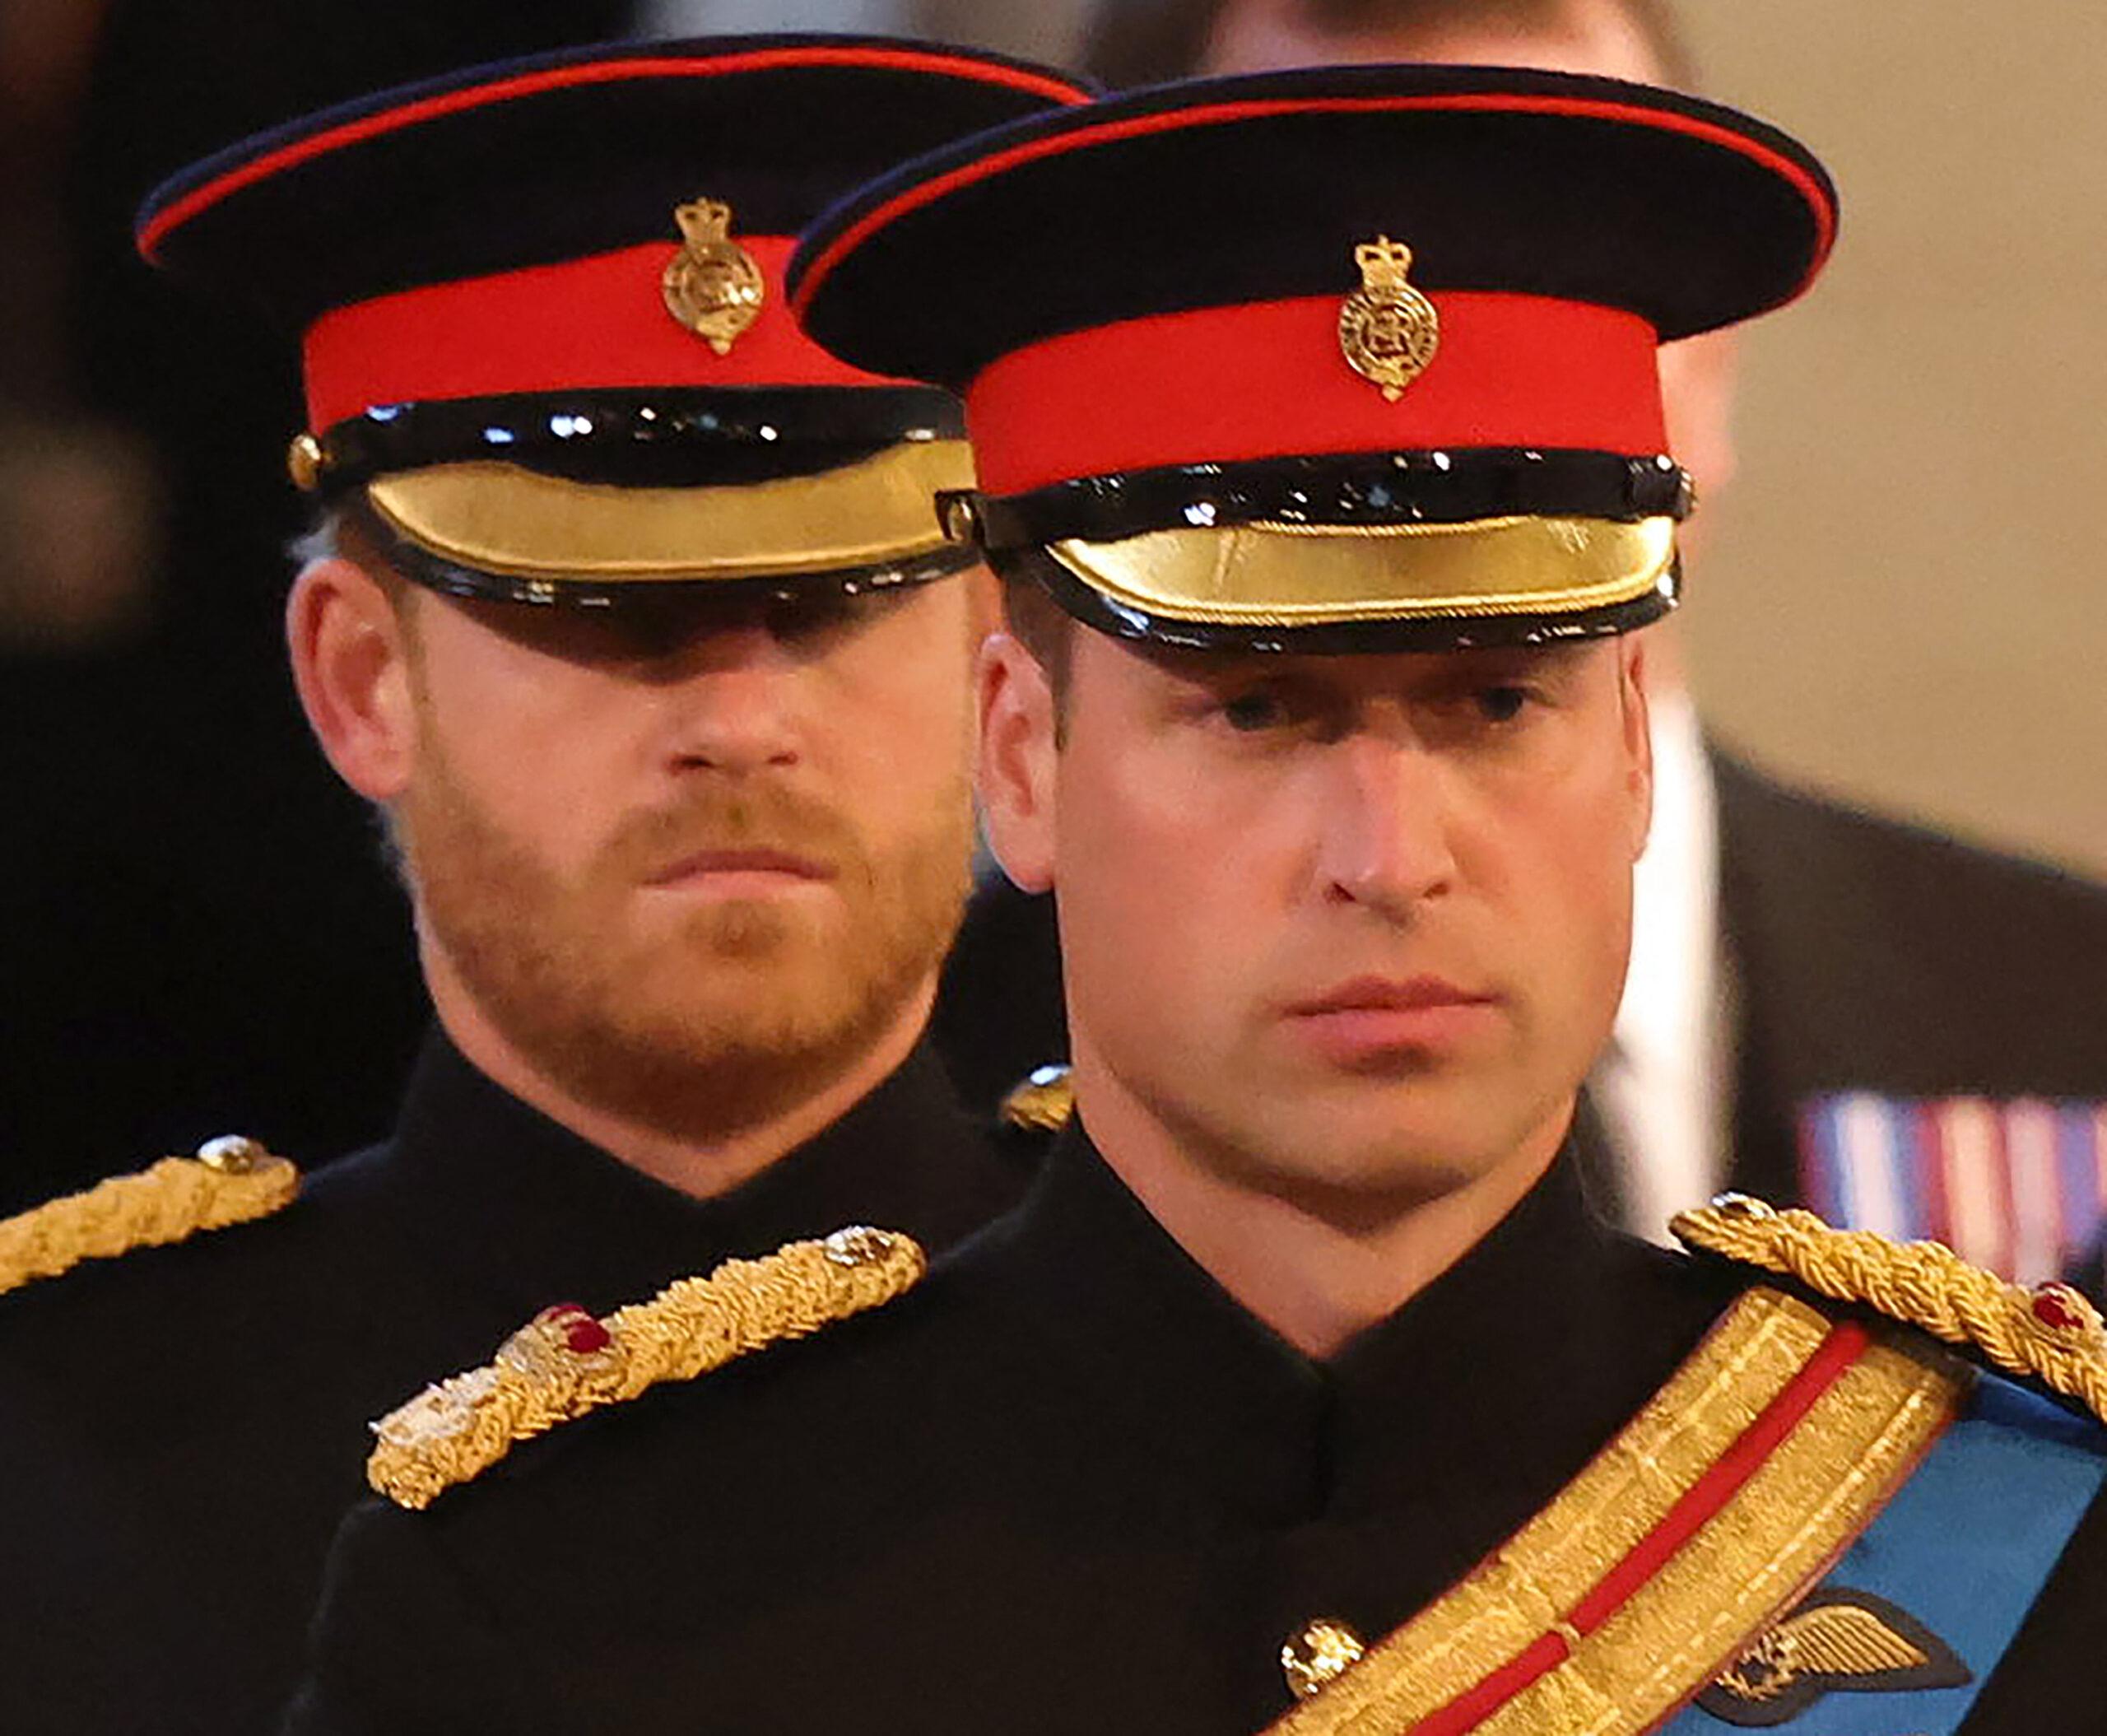 Prince William, Prince Harry, Princess Eugenie, Princess Beatrice, Lady Louise Windsor, James, Viscount Severn, Peter Phillips and Zara Tindall attend a vigil, following the death of Britain's Queen Elizabeth II, inside Westminster Hall, London, UK,